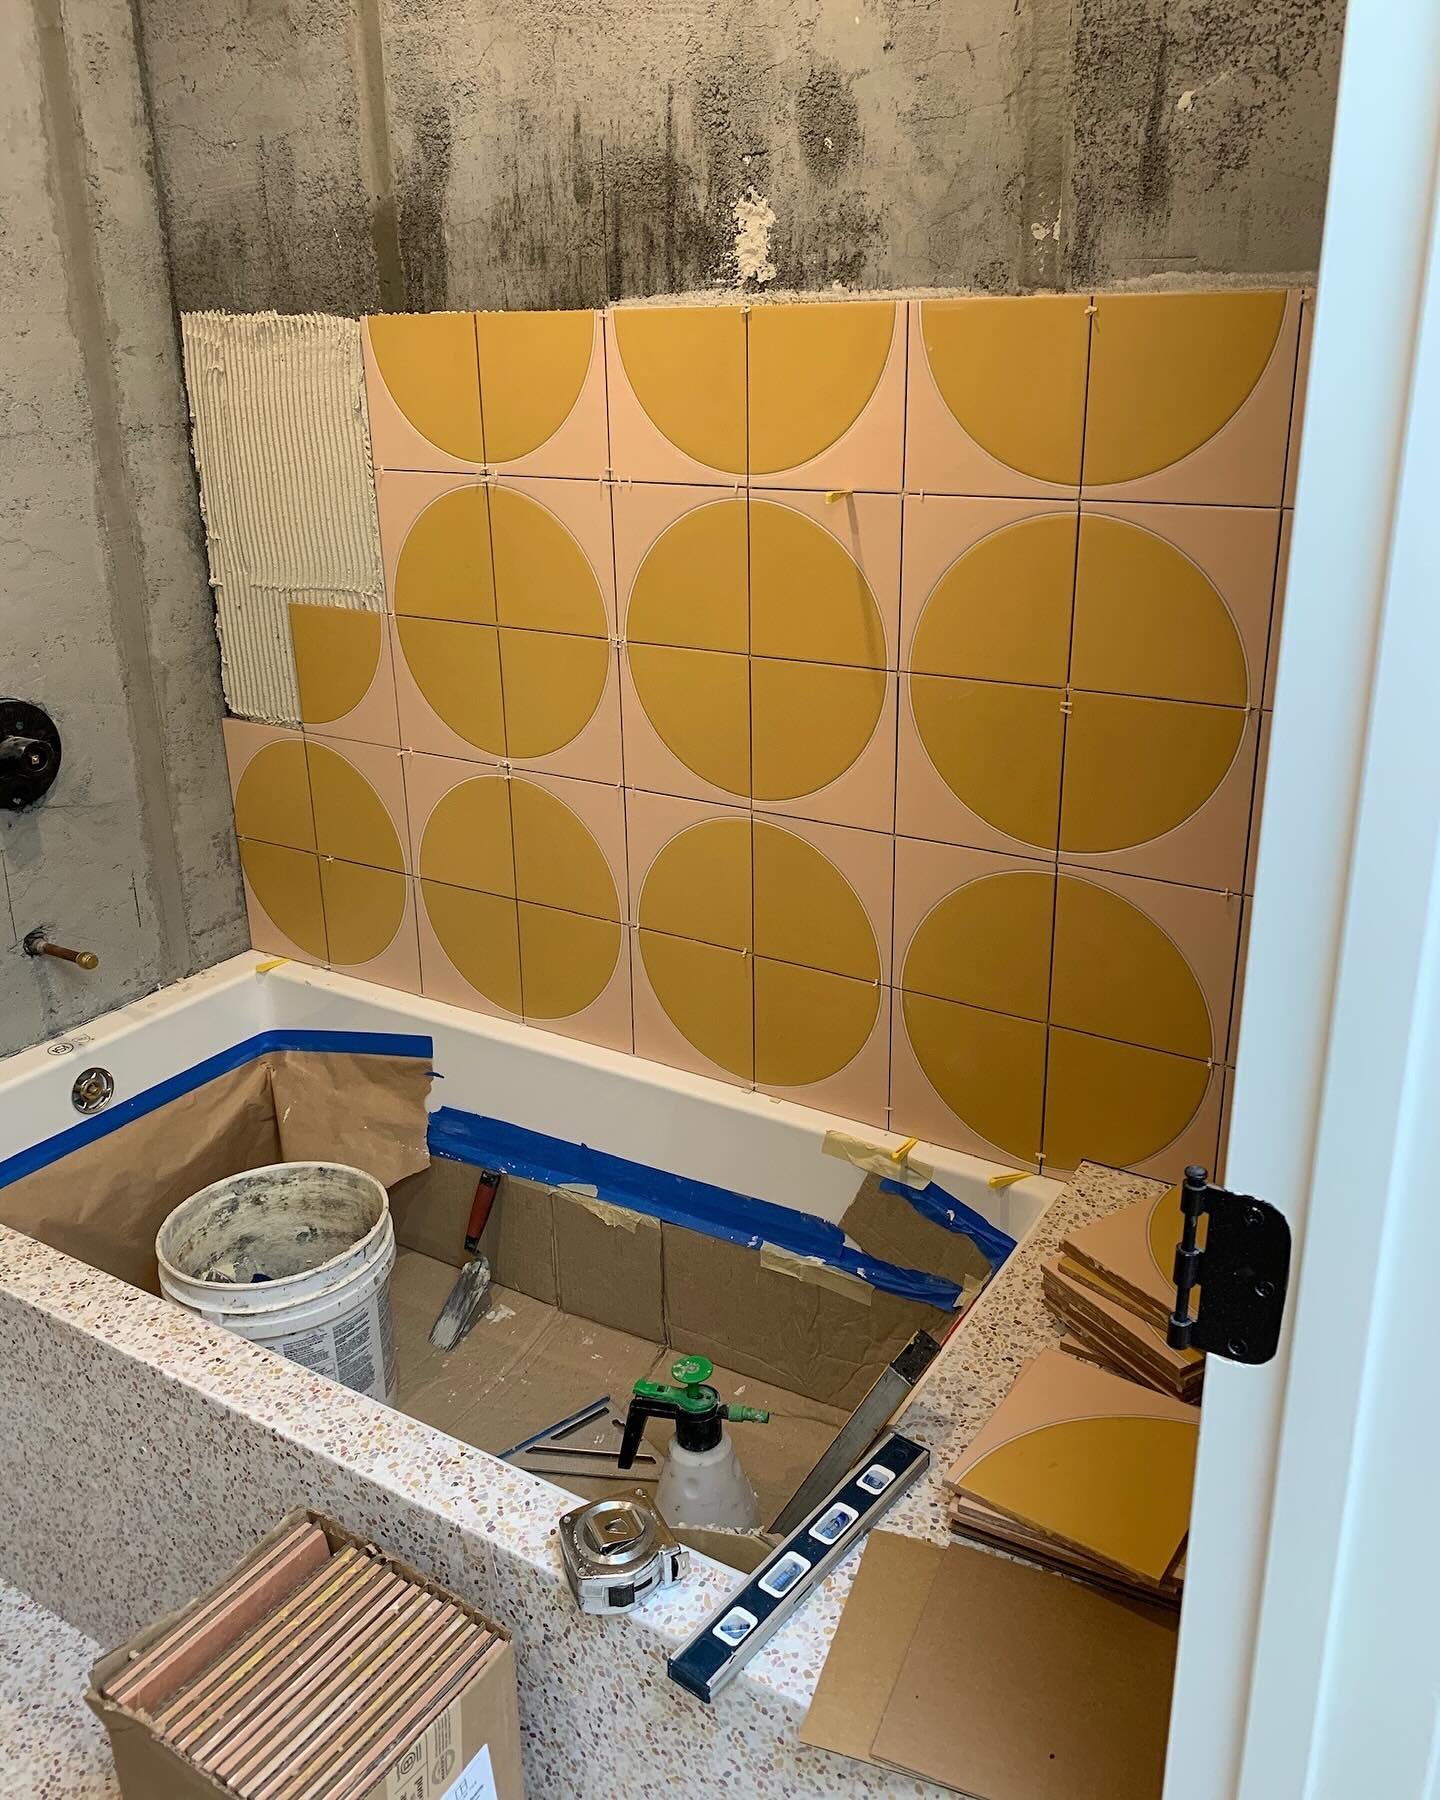 a sunny before and after ☀️ //

〰️ our alabaster medium marble, yellow and pink chip is the perfect warm color in this sunny bathroom 〰️ used here as Venice tiles and Pacifica counter in the same mix 

designed by @clairethomas